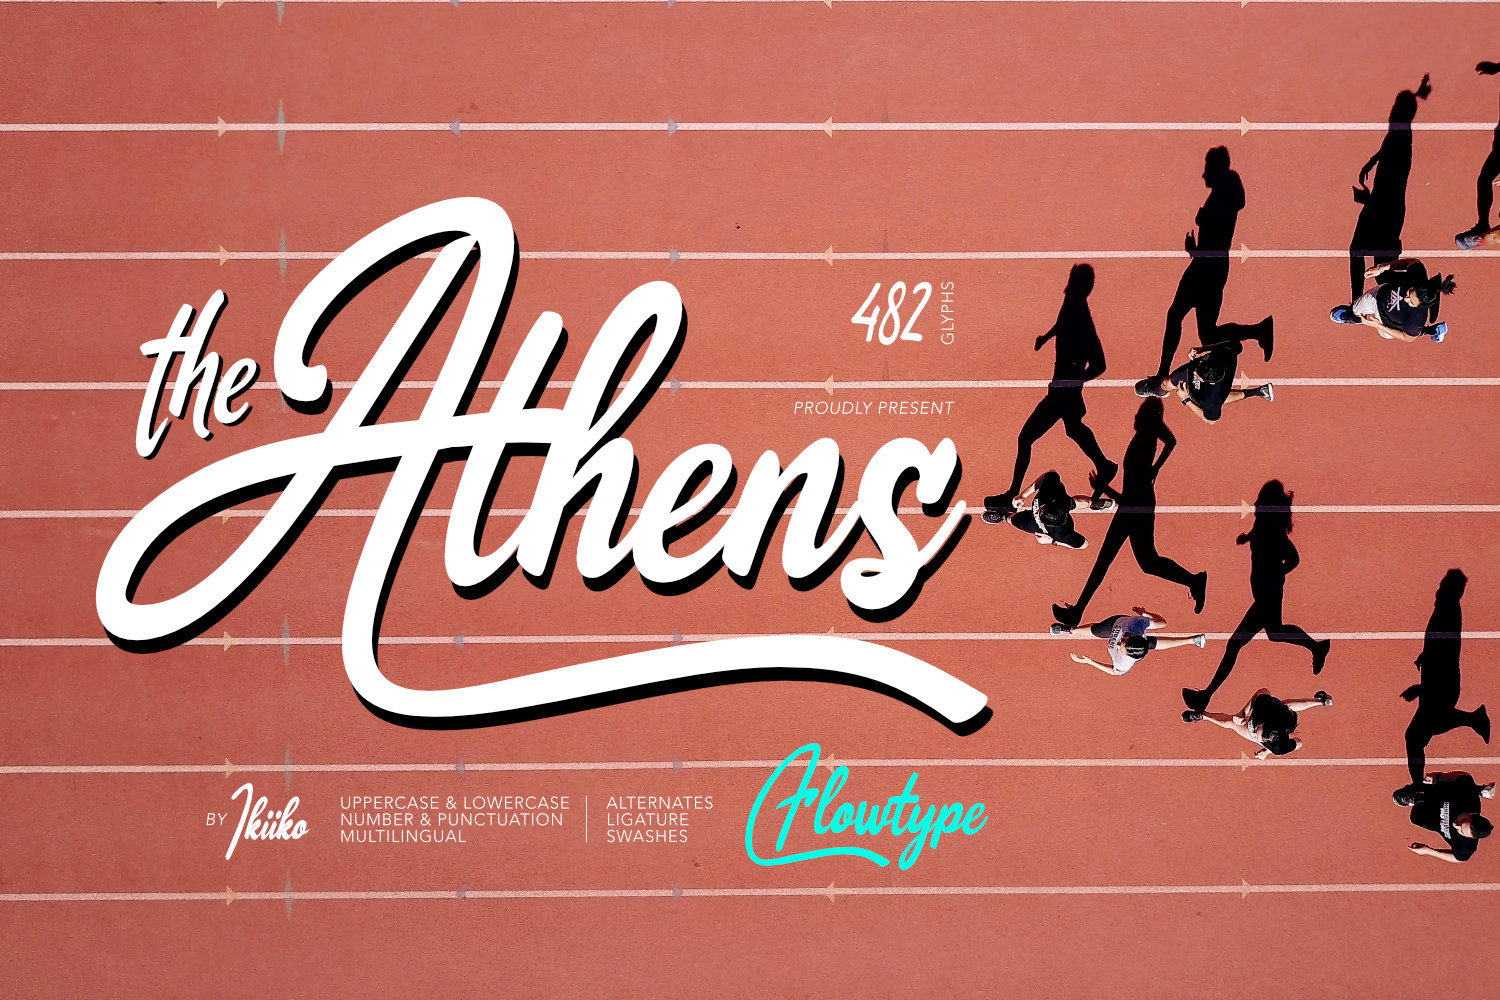 The Athens Free Font